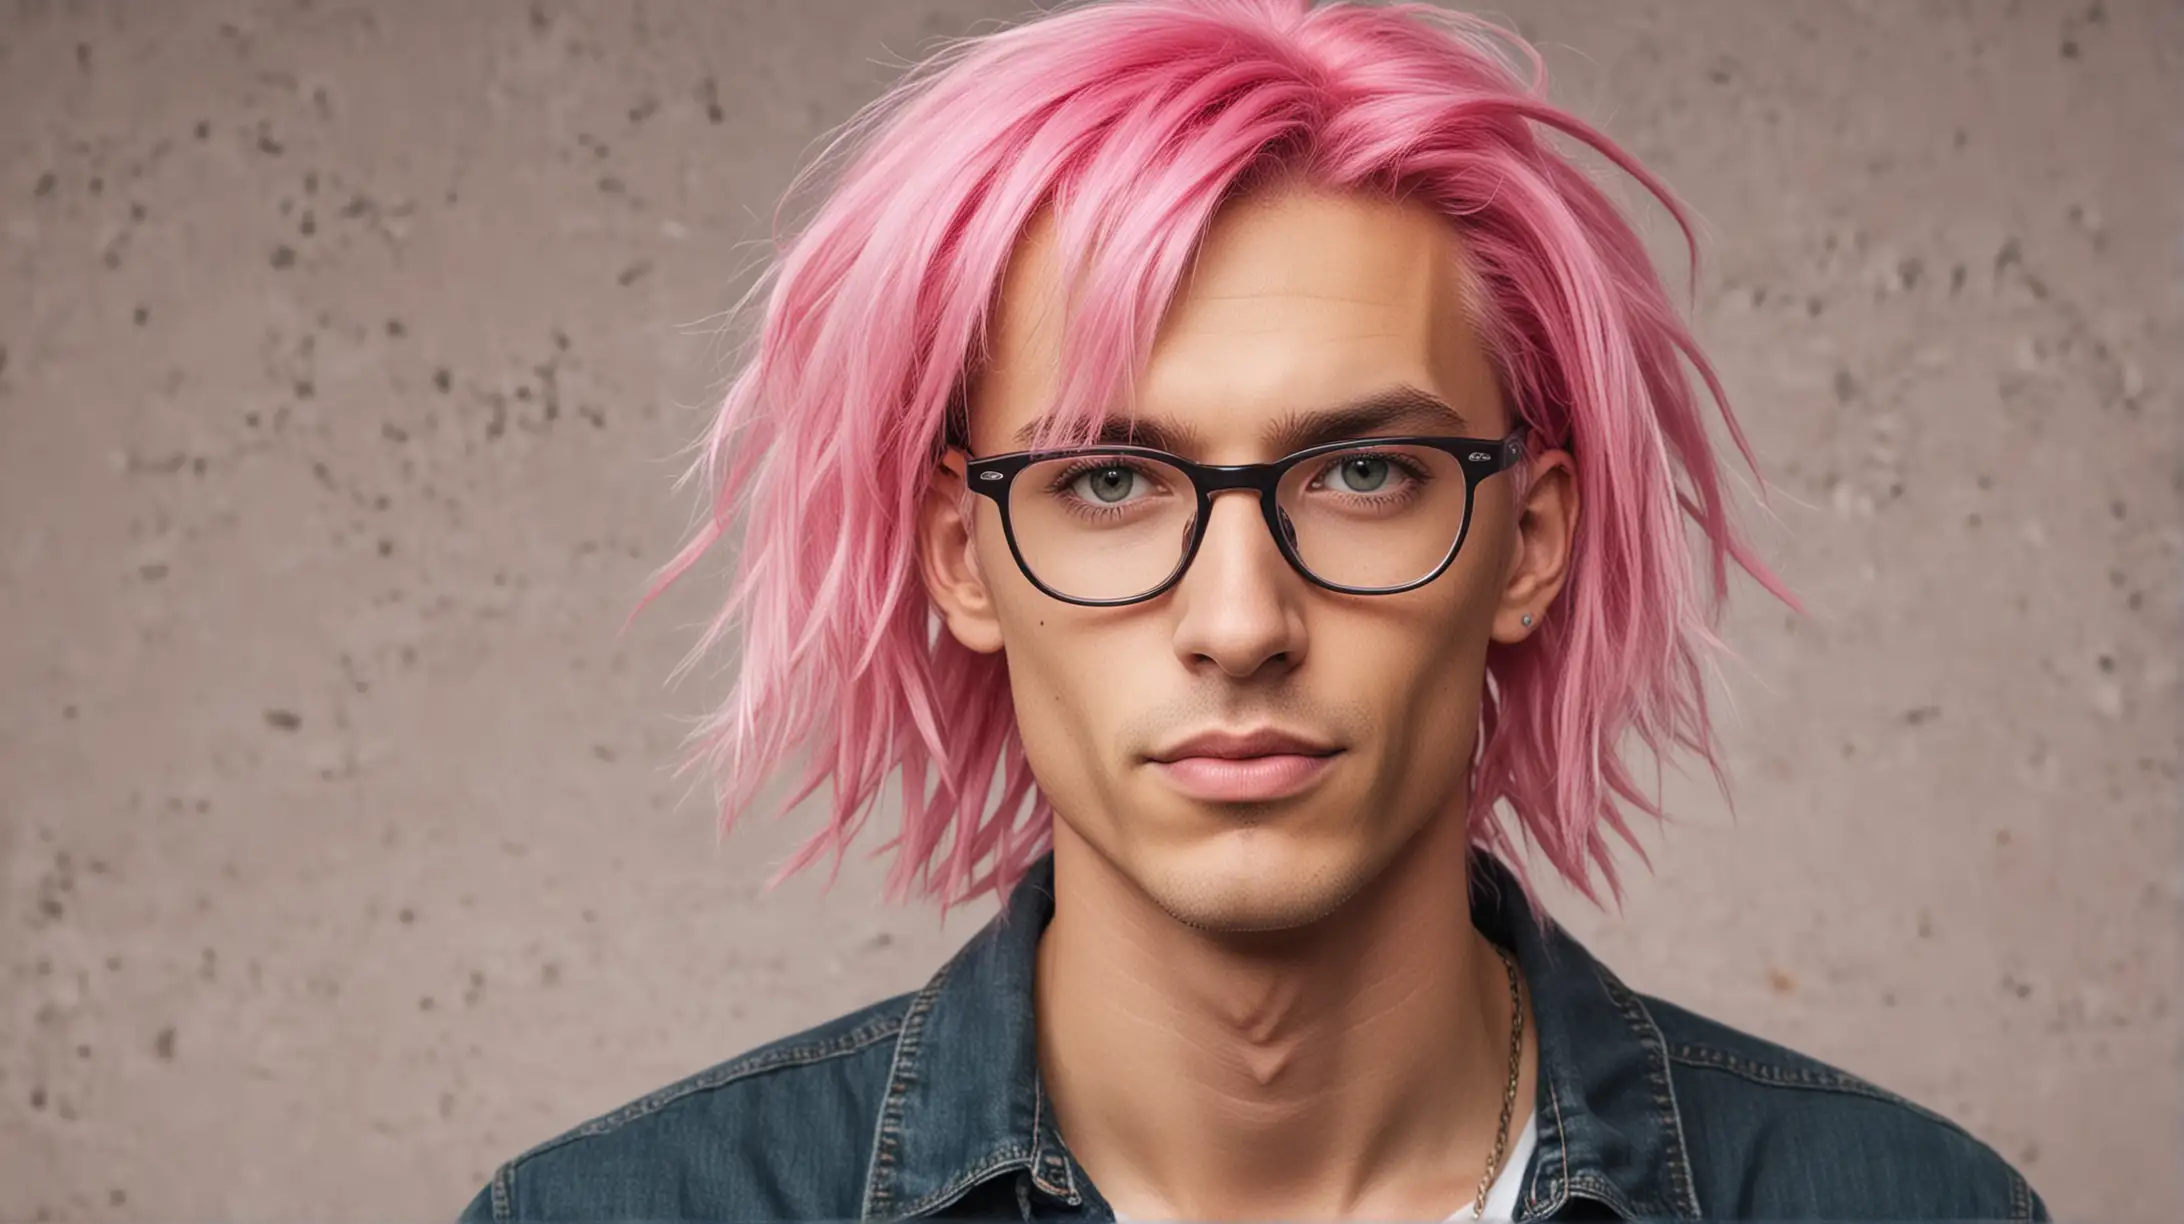 Activist with Pink Hair and Glasses Portrait of a Socially Conscious Individual